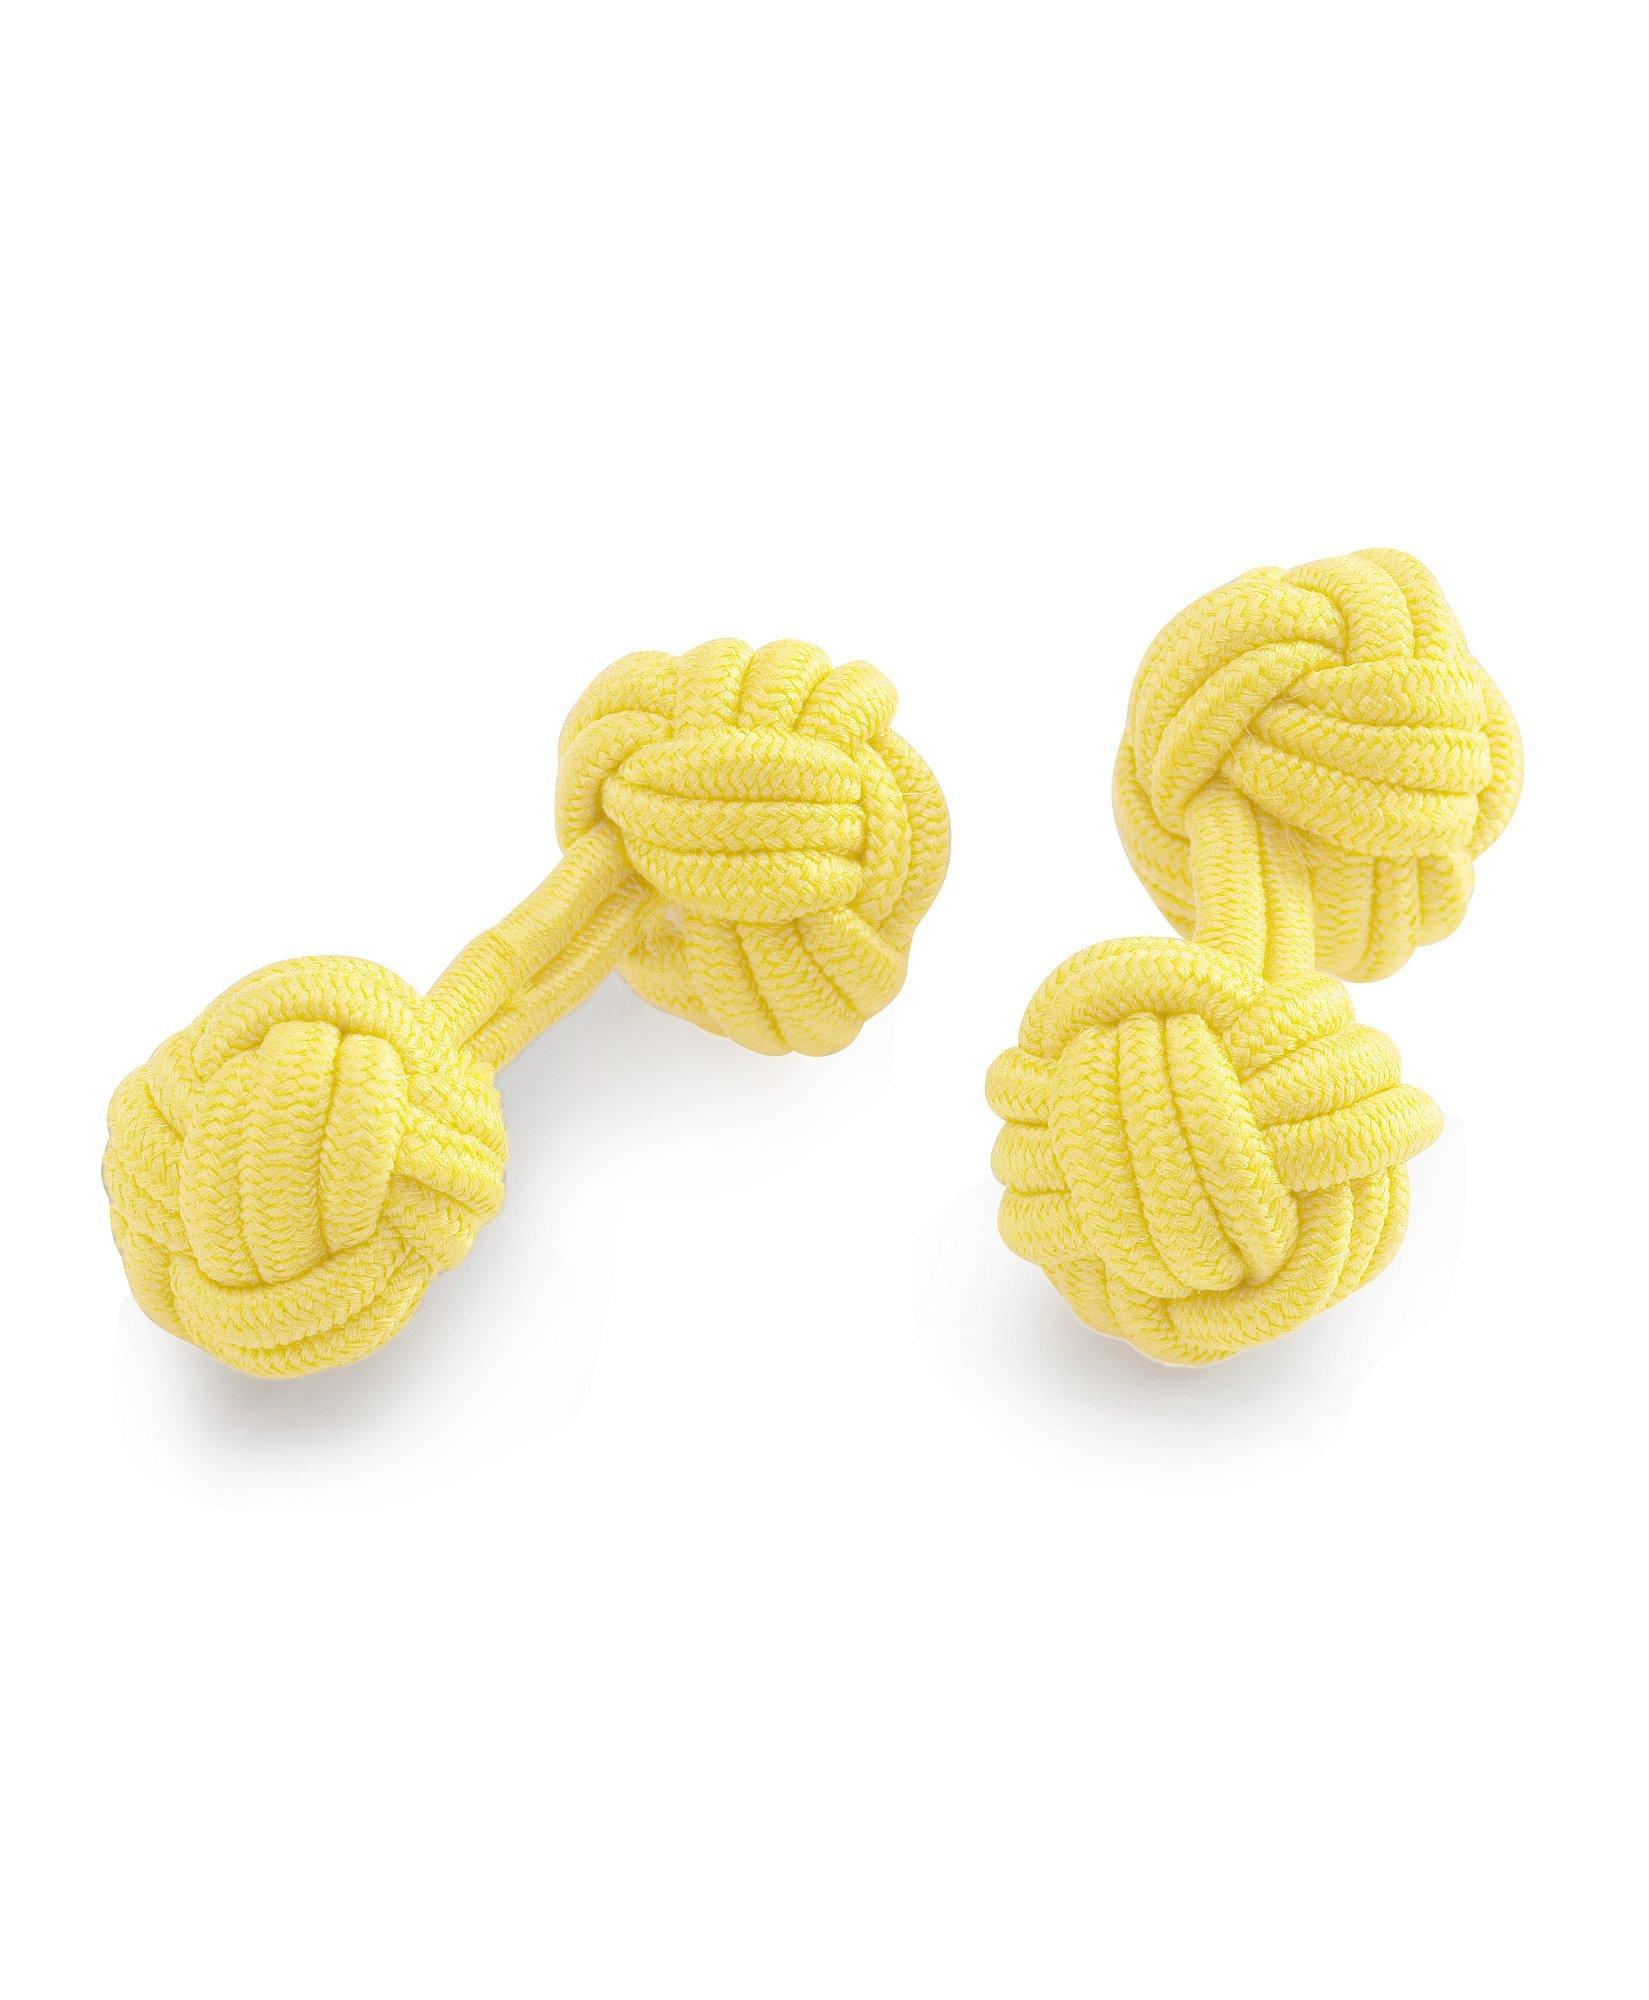 Shop Brooks Brothers Knot Cuff Links  | Bright Yellow